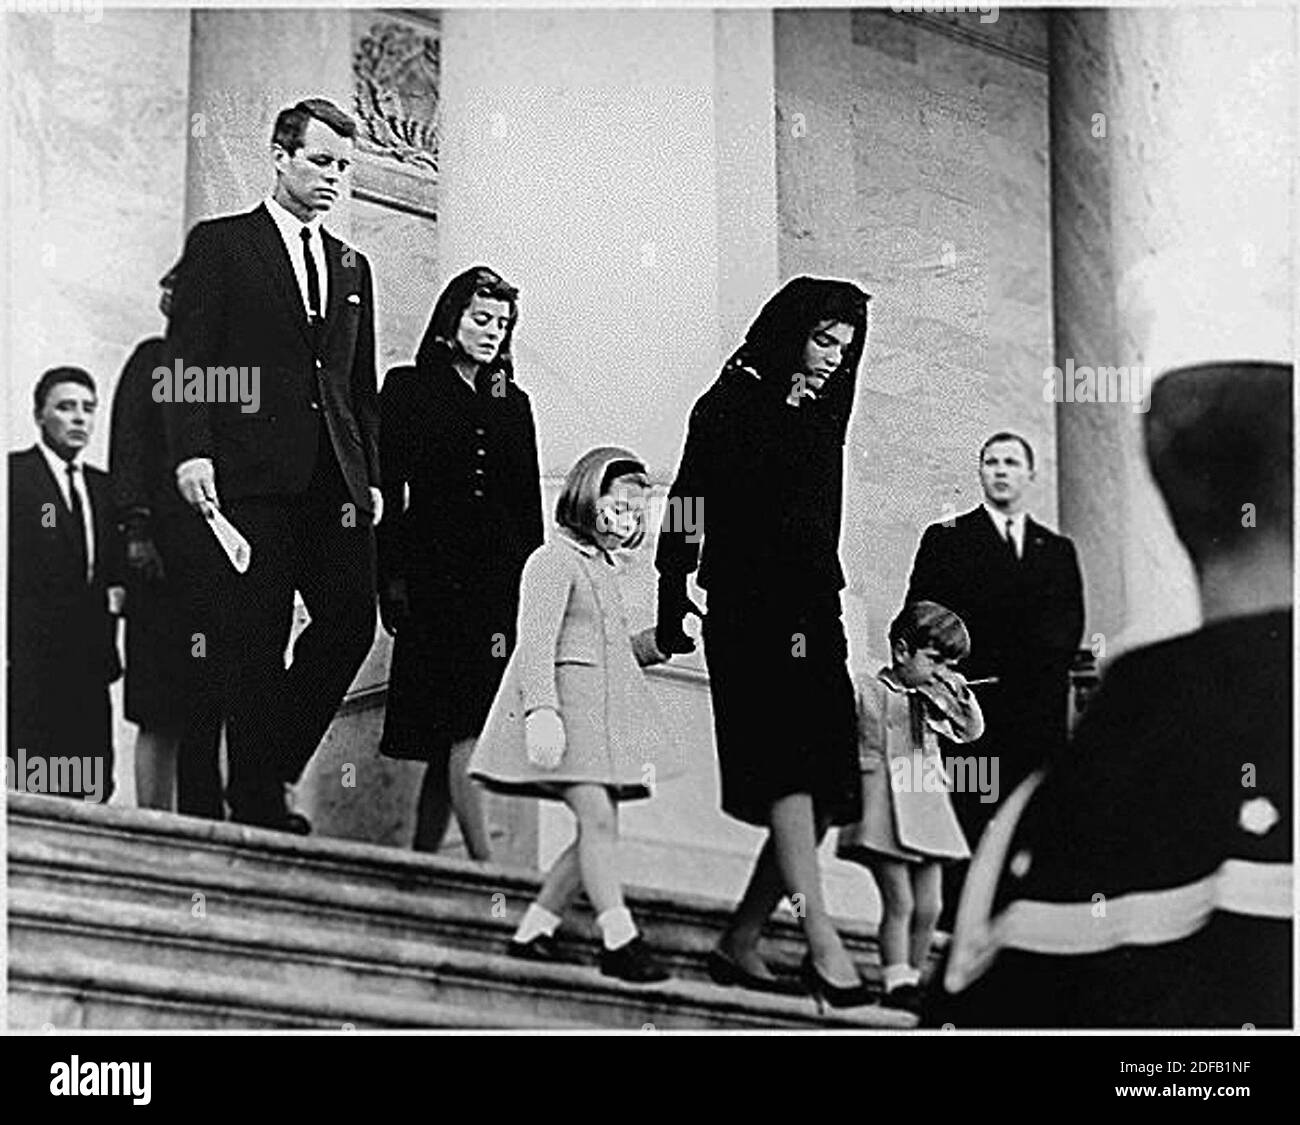 File photo - United States President John F. Kennedy's Family leaves the U.S. Capitol after Ceremony on November 24, 1963. (L-R)Caroline Kennedy, Jacqueline Bouvier Kennedy, John F. Kennedy, Jr. (2nd row) Attorney General Robert F. Kennedy, Patricia Kennedy Lawford (hidden) Jean Kennedy Smith (3rd Row) Peter Lawford. Jean Kennedy Smith, the last surviving sibling of President John F. Kennedy and a former ambassador to Ireland, died Wednesday. She was 92. Photo by JFK Library via CNP / ABACAPRESS.COM Stock Photo